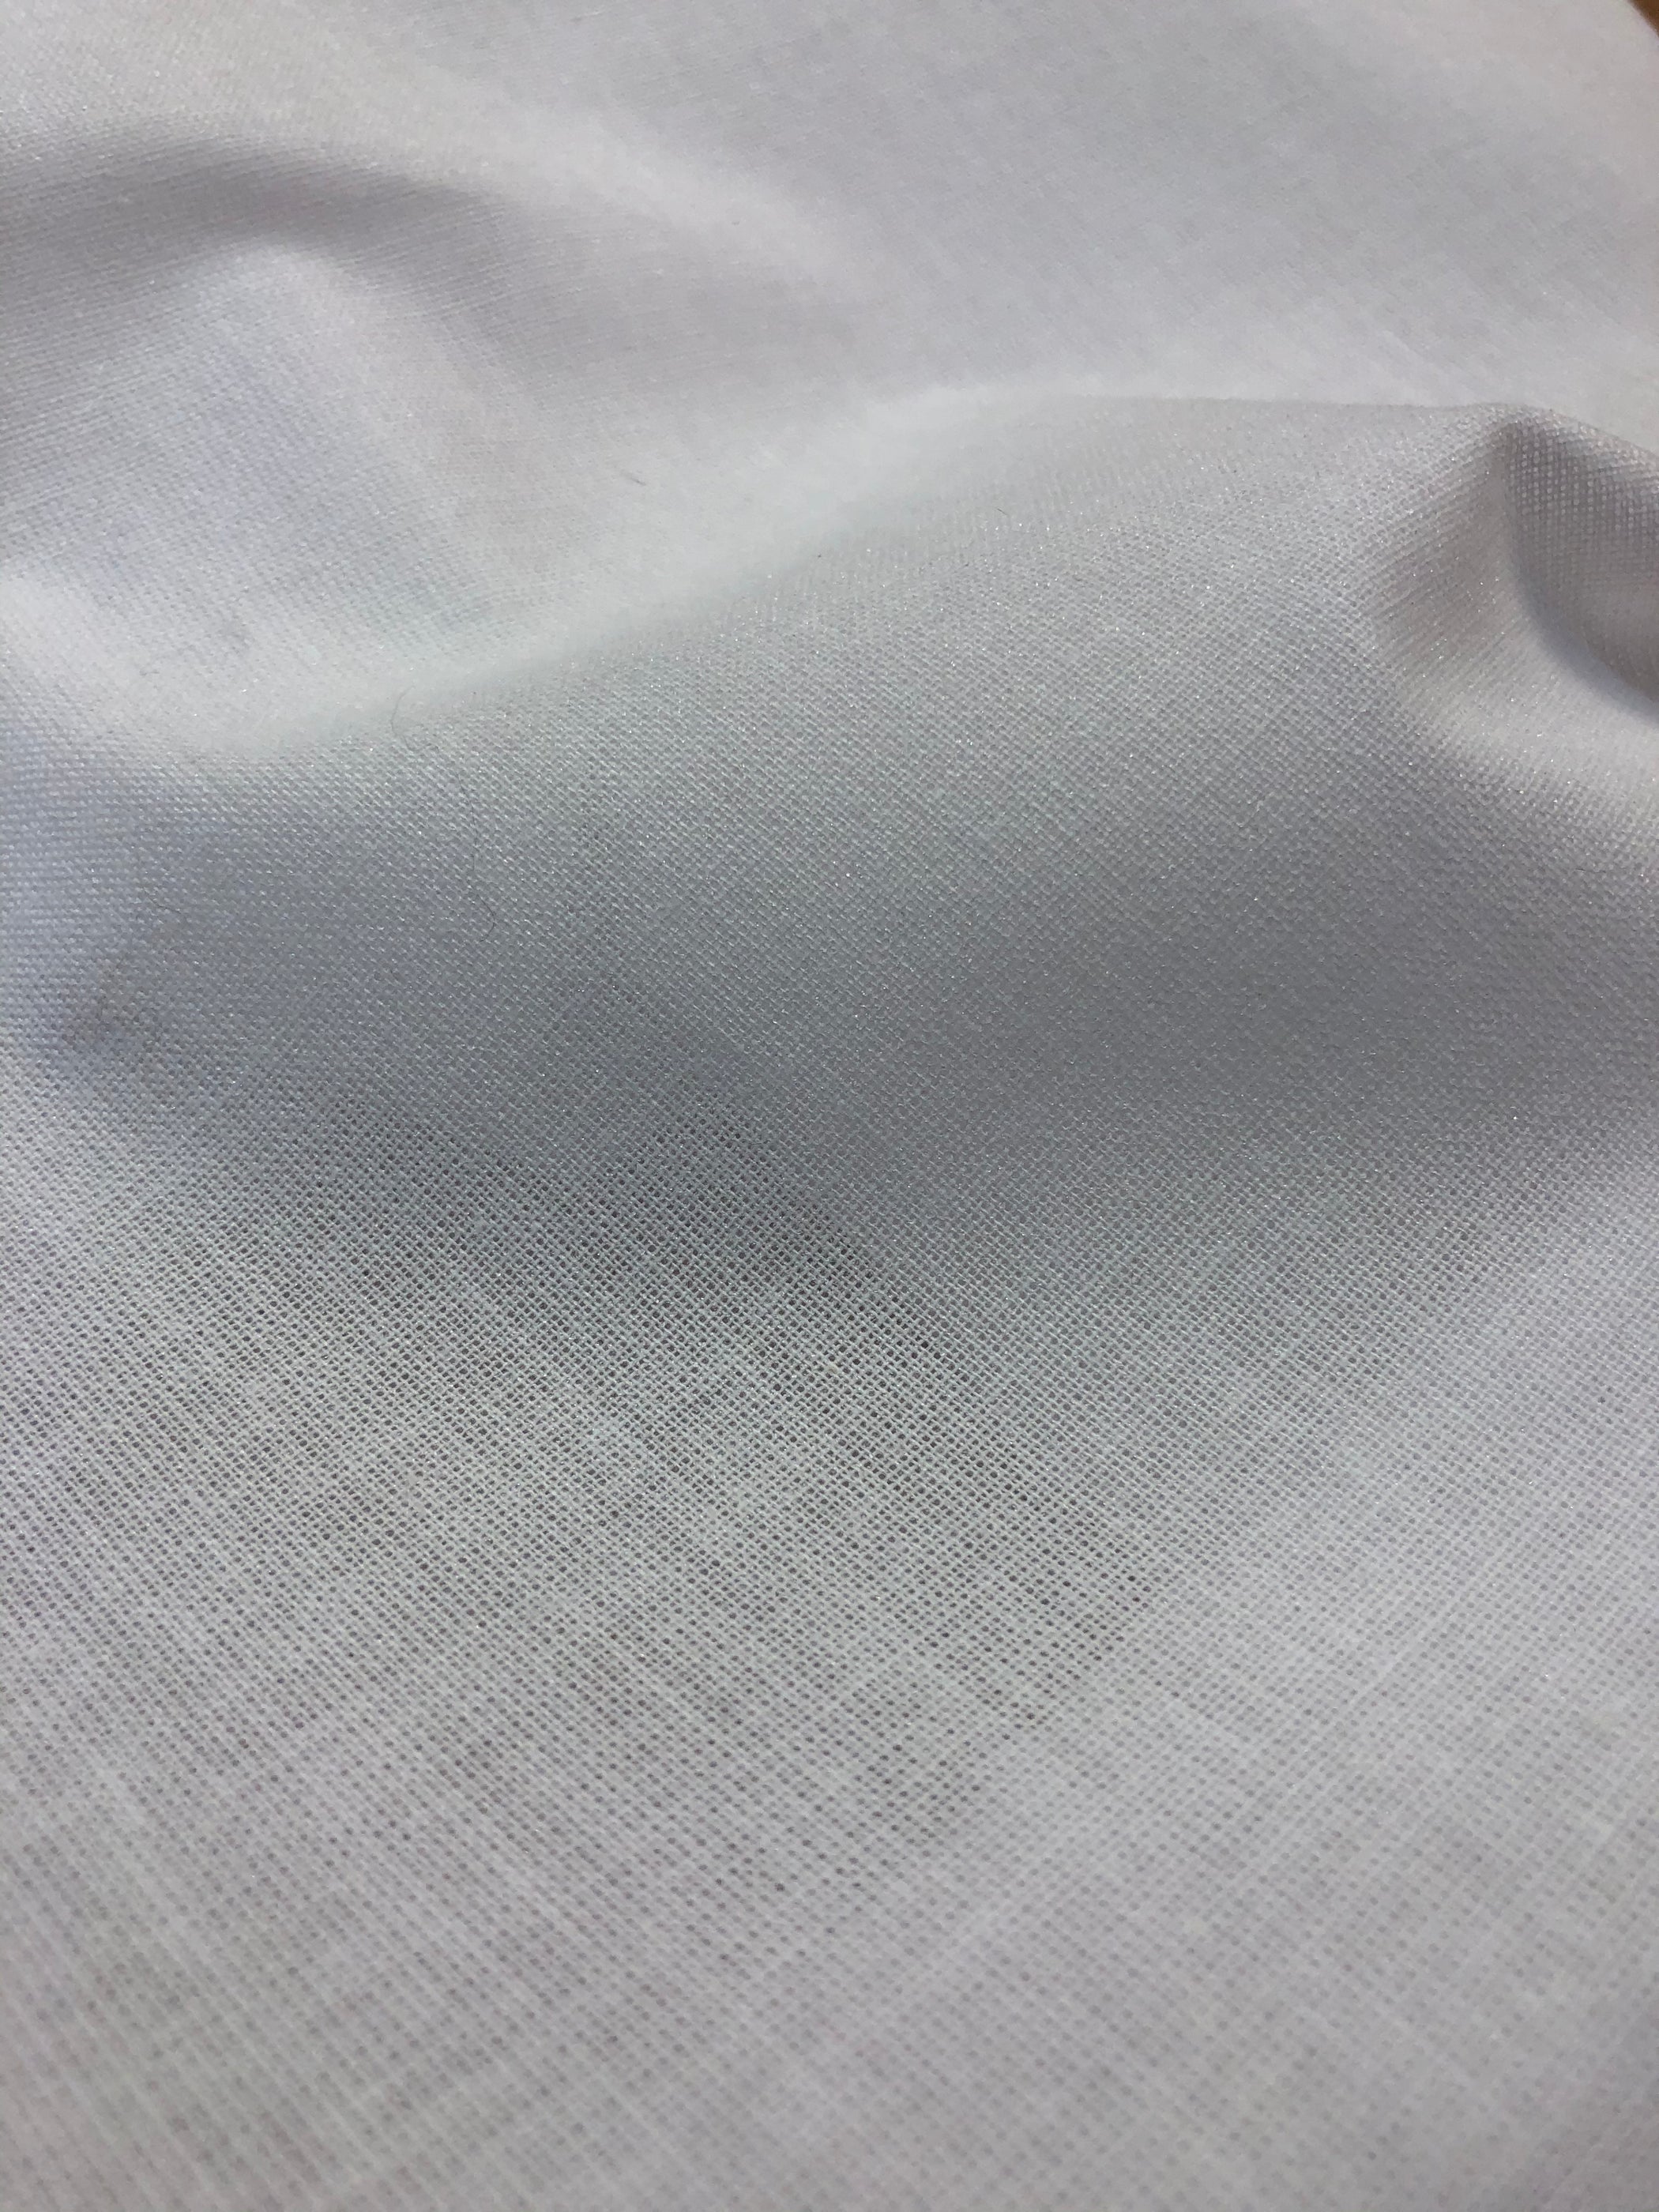 Woven Fusible Interfacing - Medium Weight – Affordable Textiles